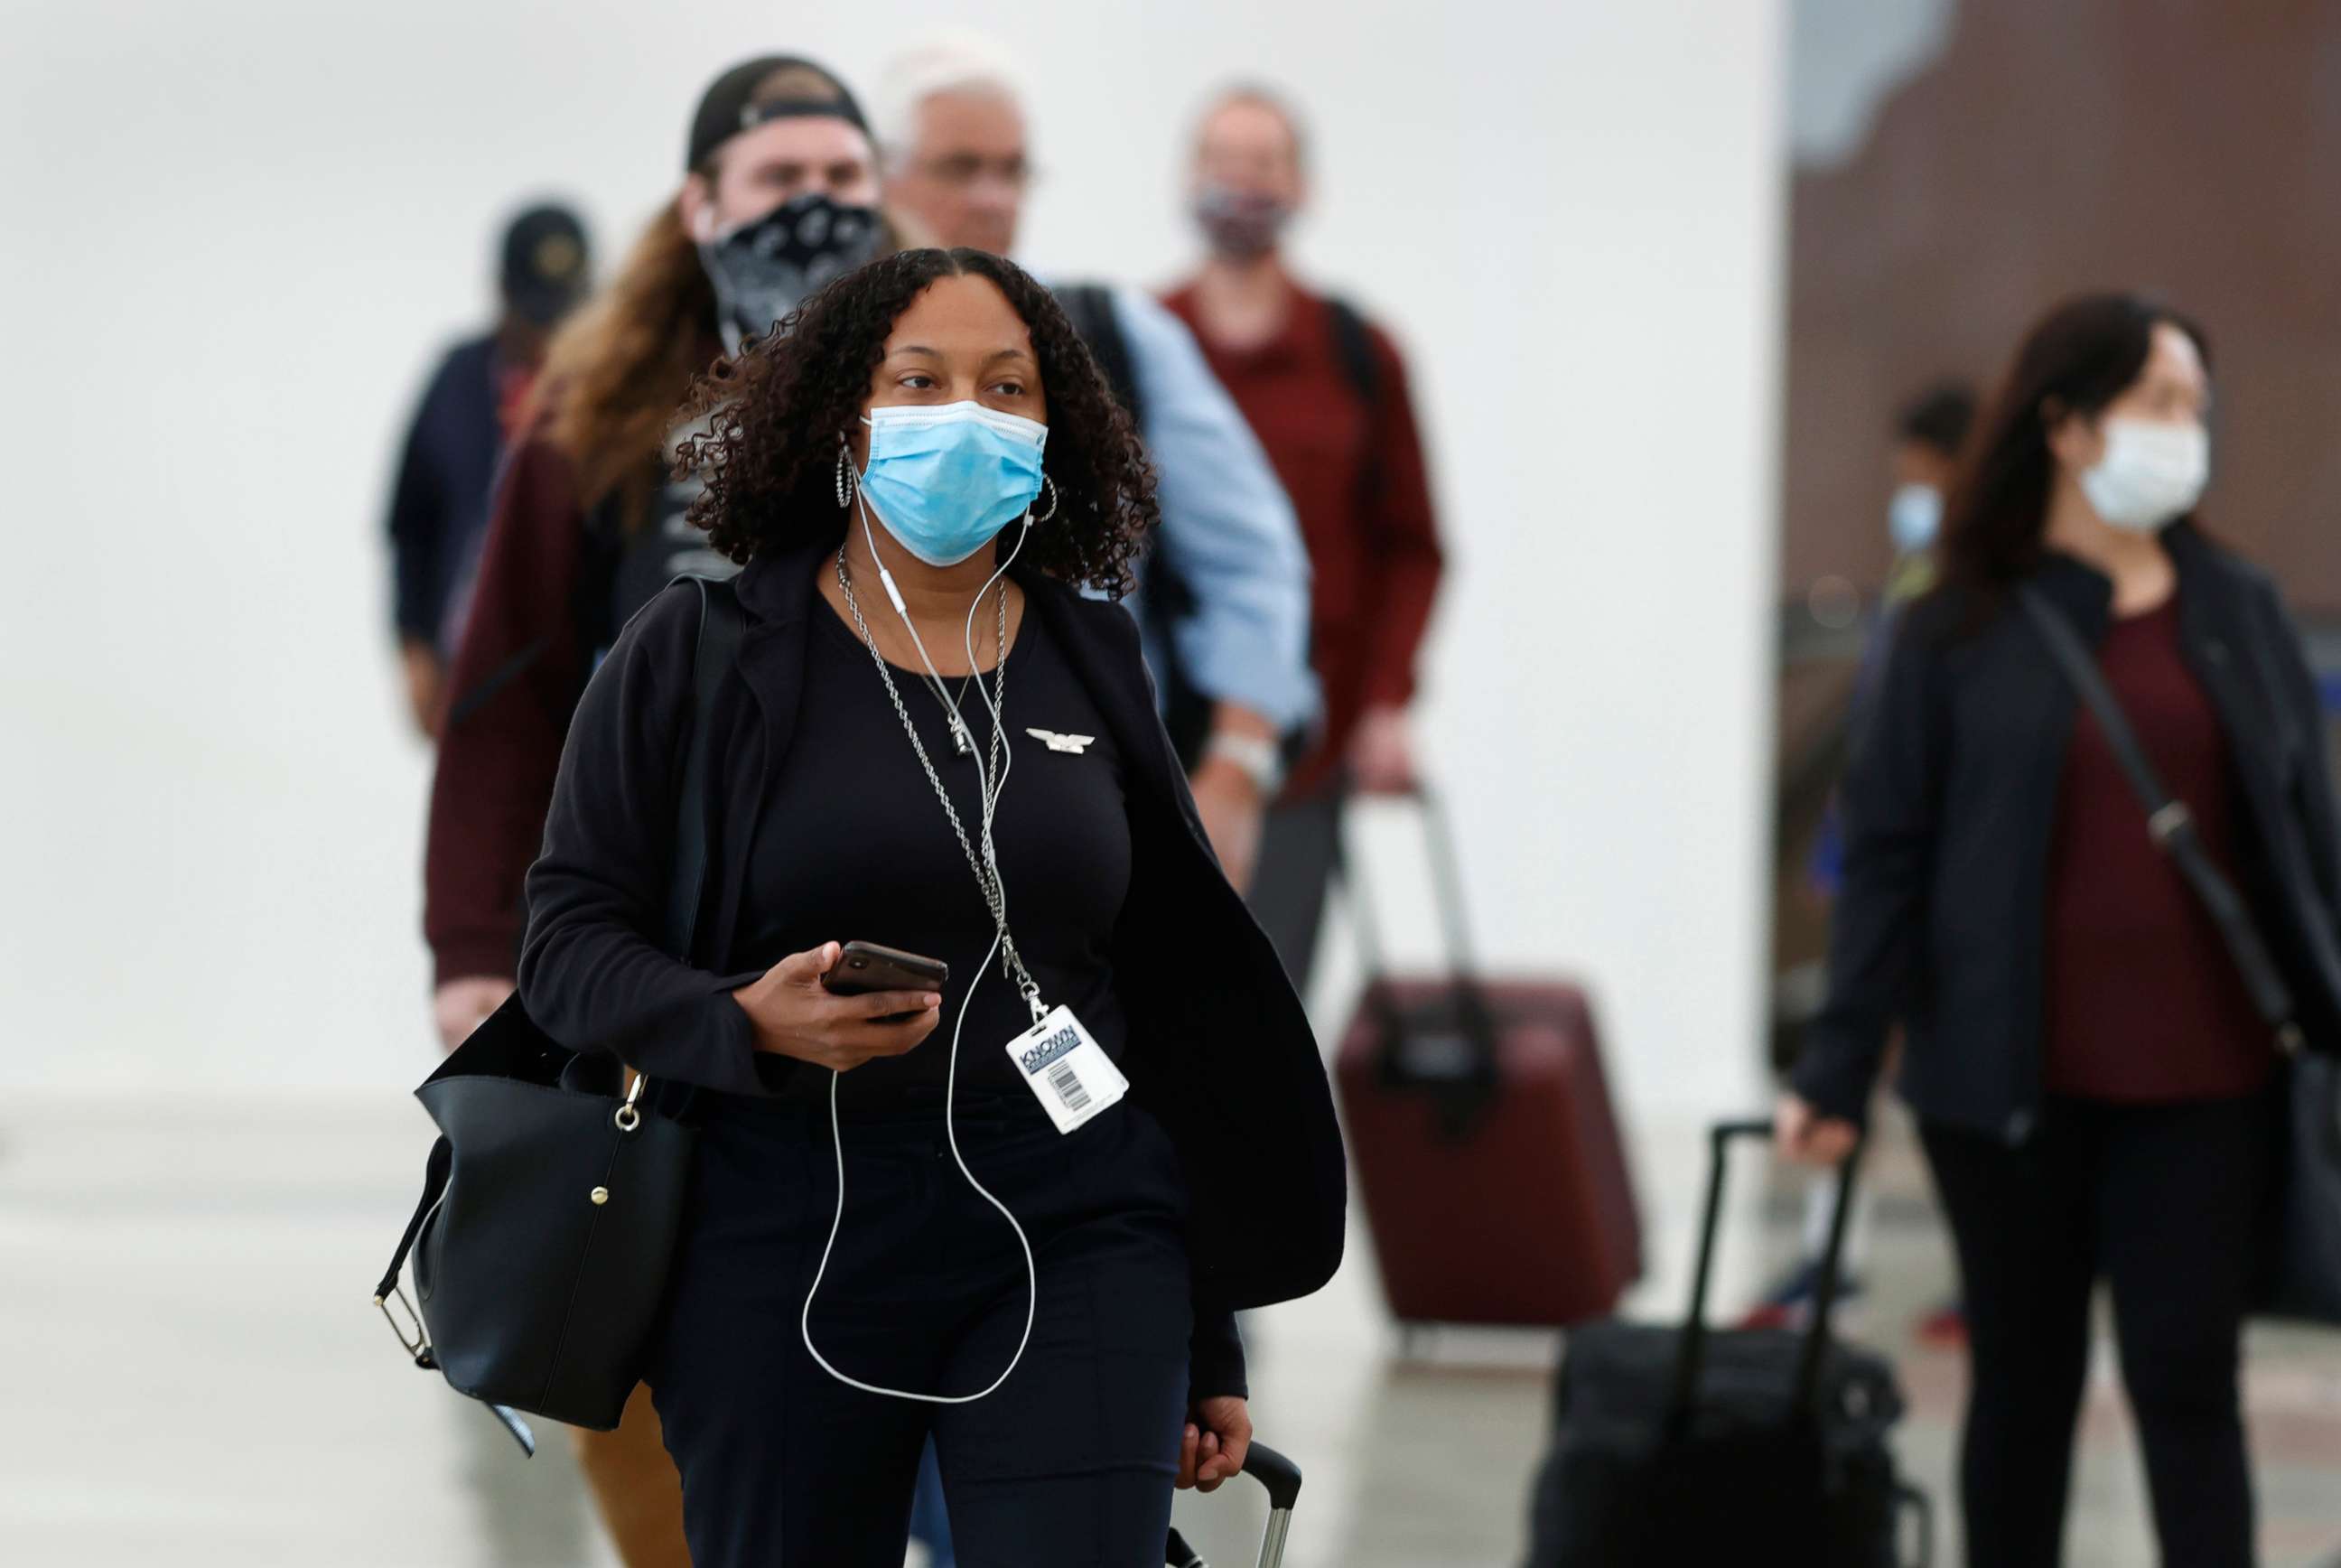 PHOTO: Passengers wear face masks as they enter the main terminal after arriving at Denver International Airport to stop the spread of the new coronavirus, April 23, 2020, in Denver.